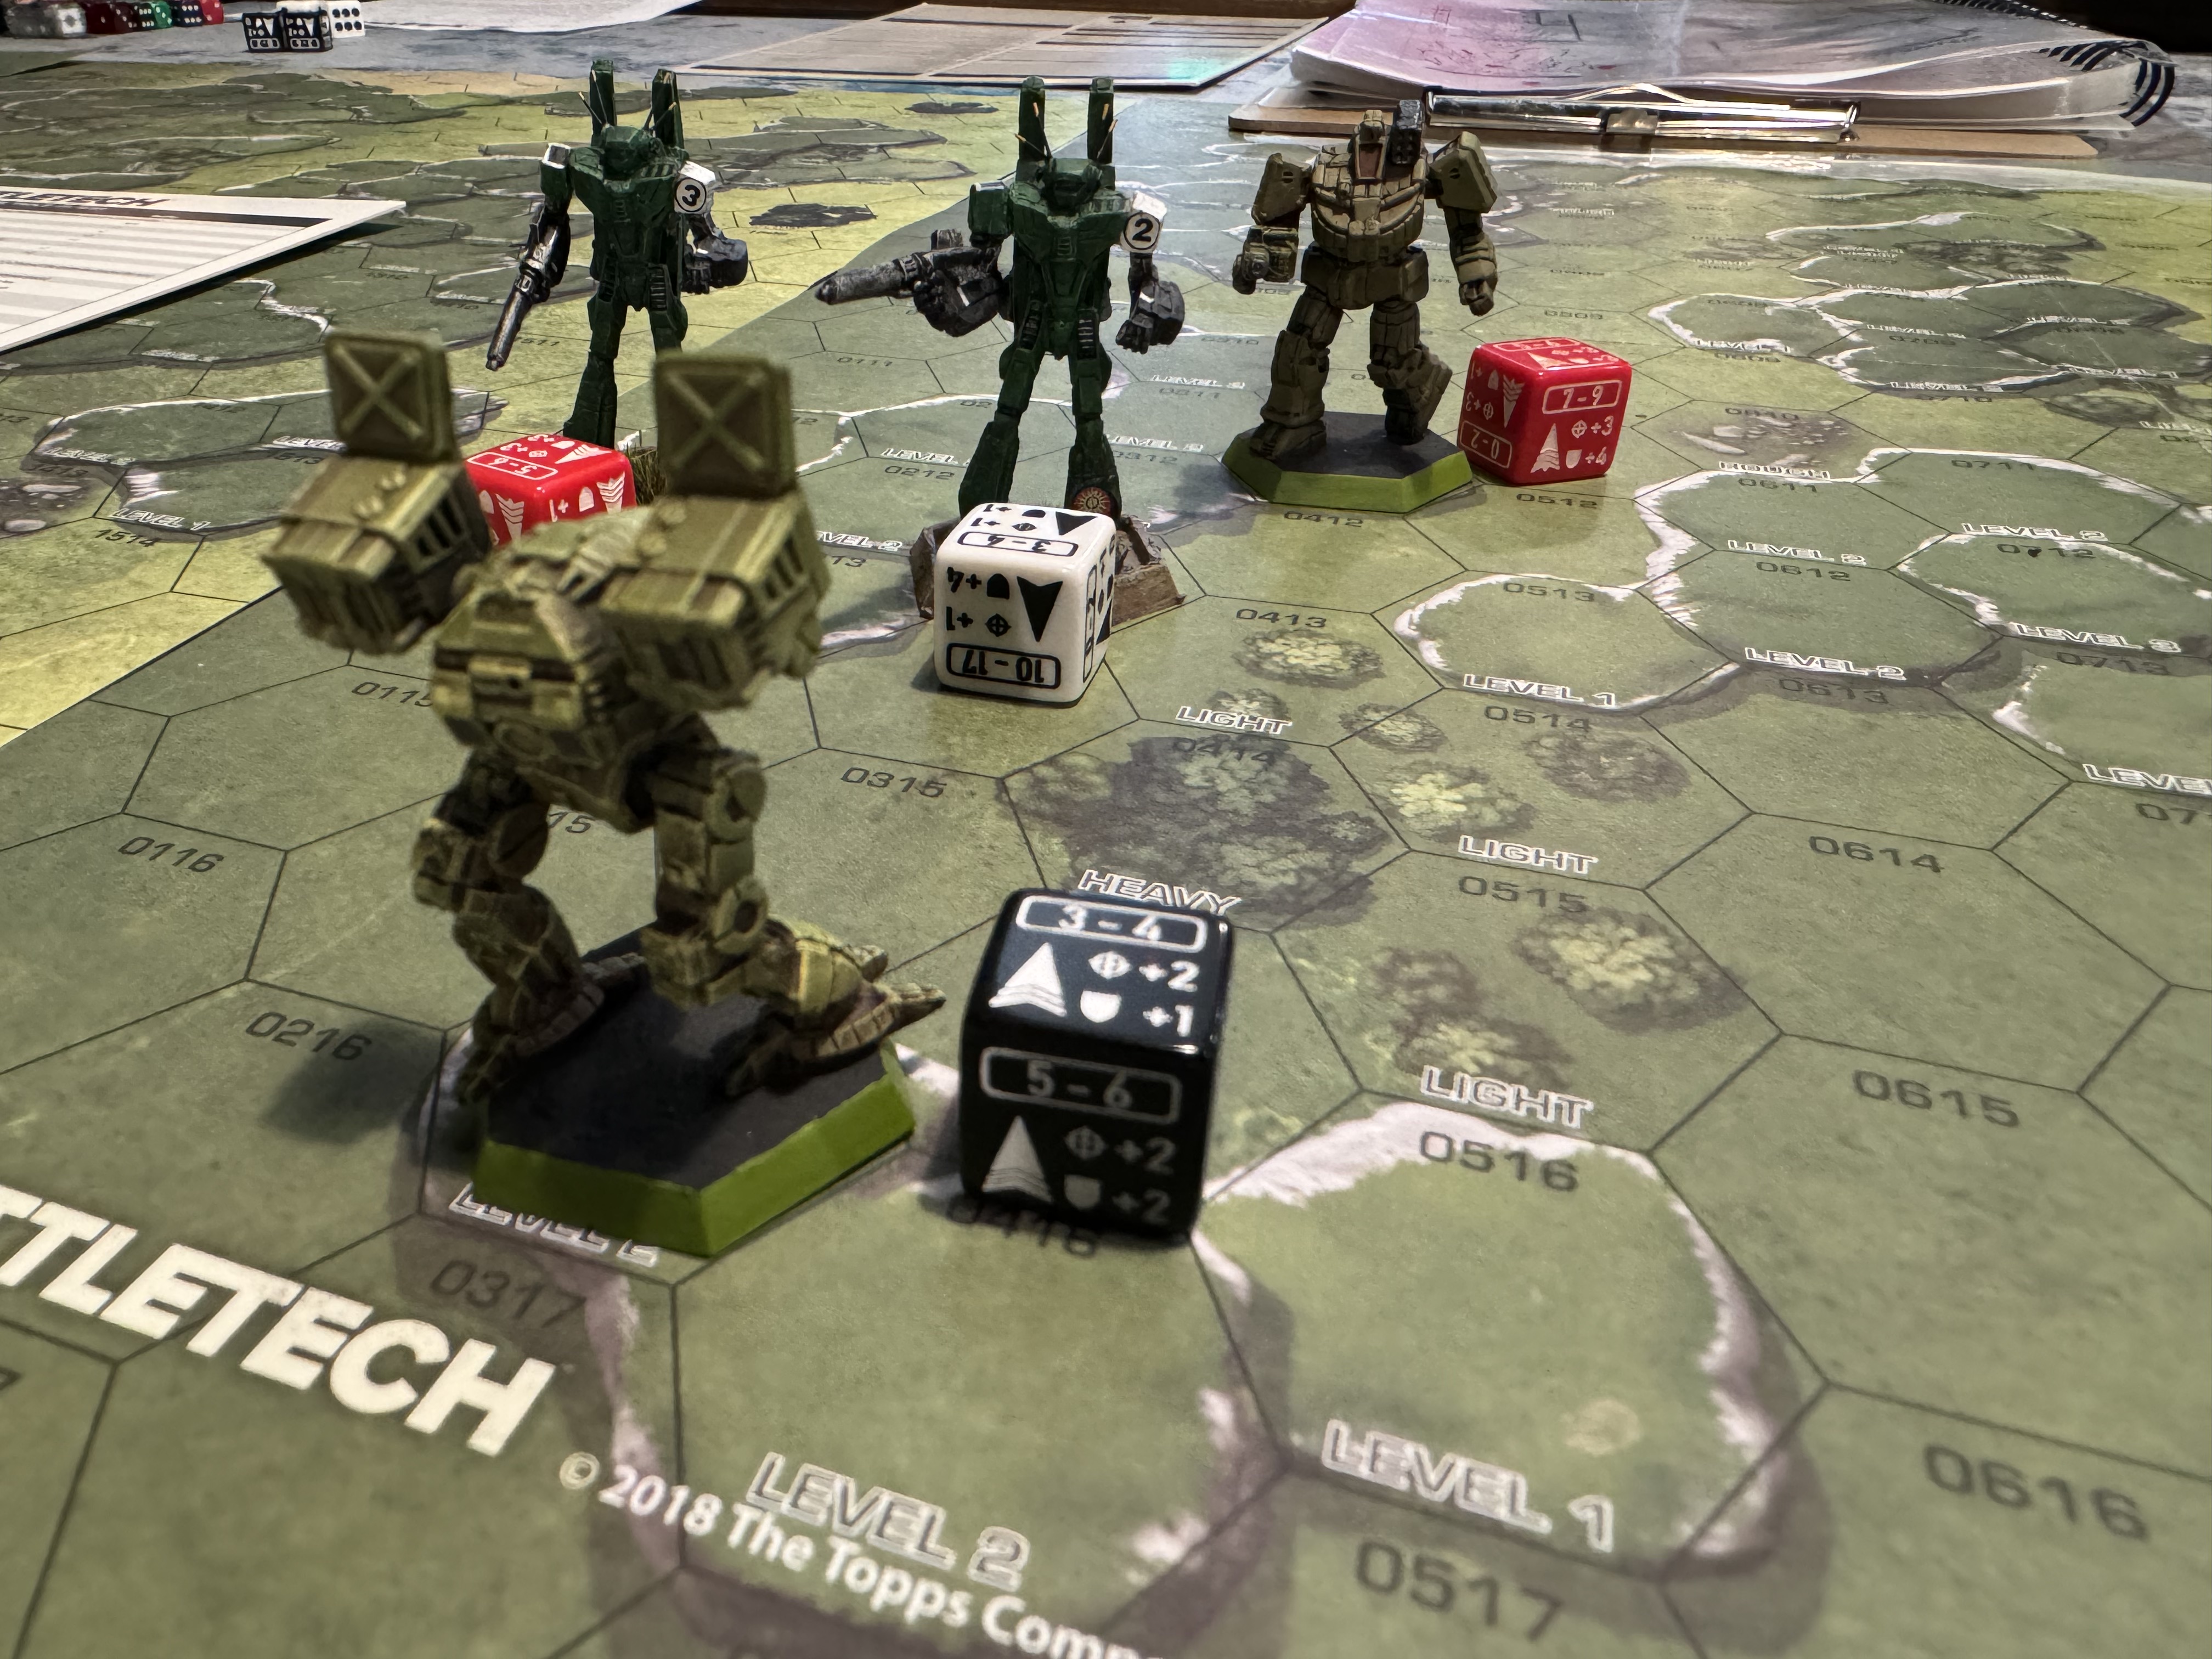 All four mechs get up close and personal as we enter the final stages of the game